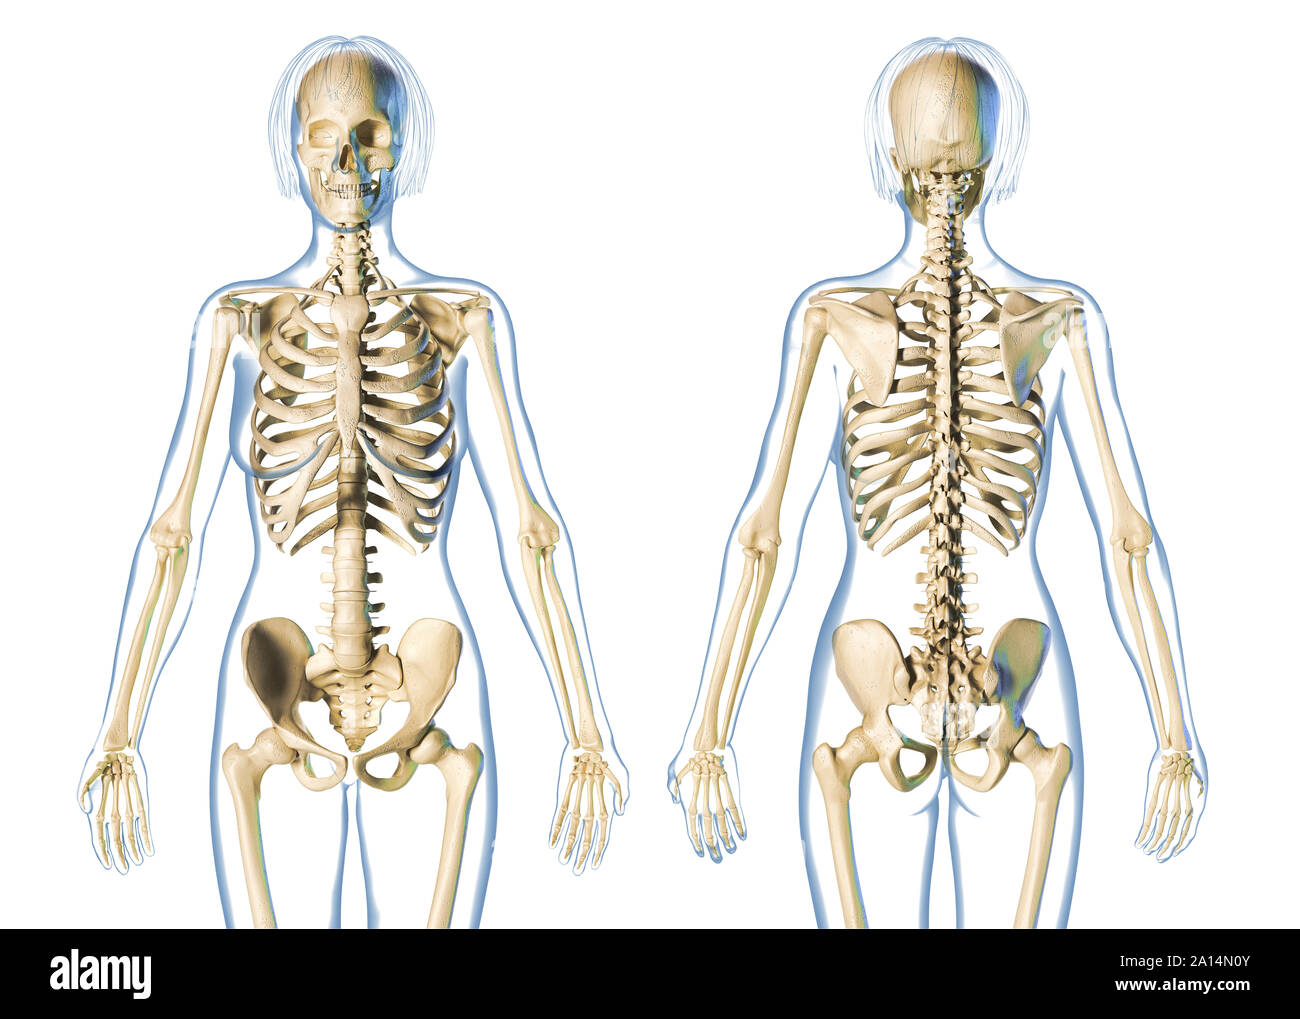 Female skeletal system front and rear views, on white background. Stock Photo